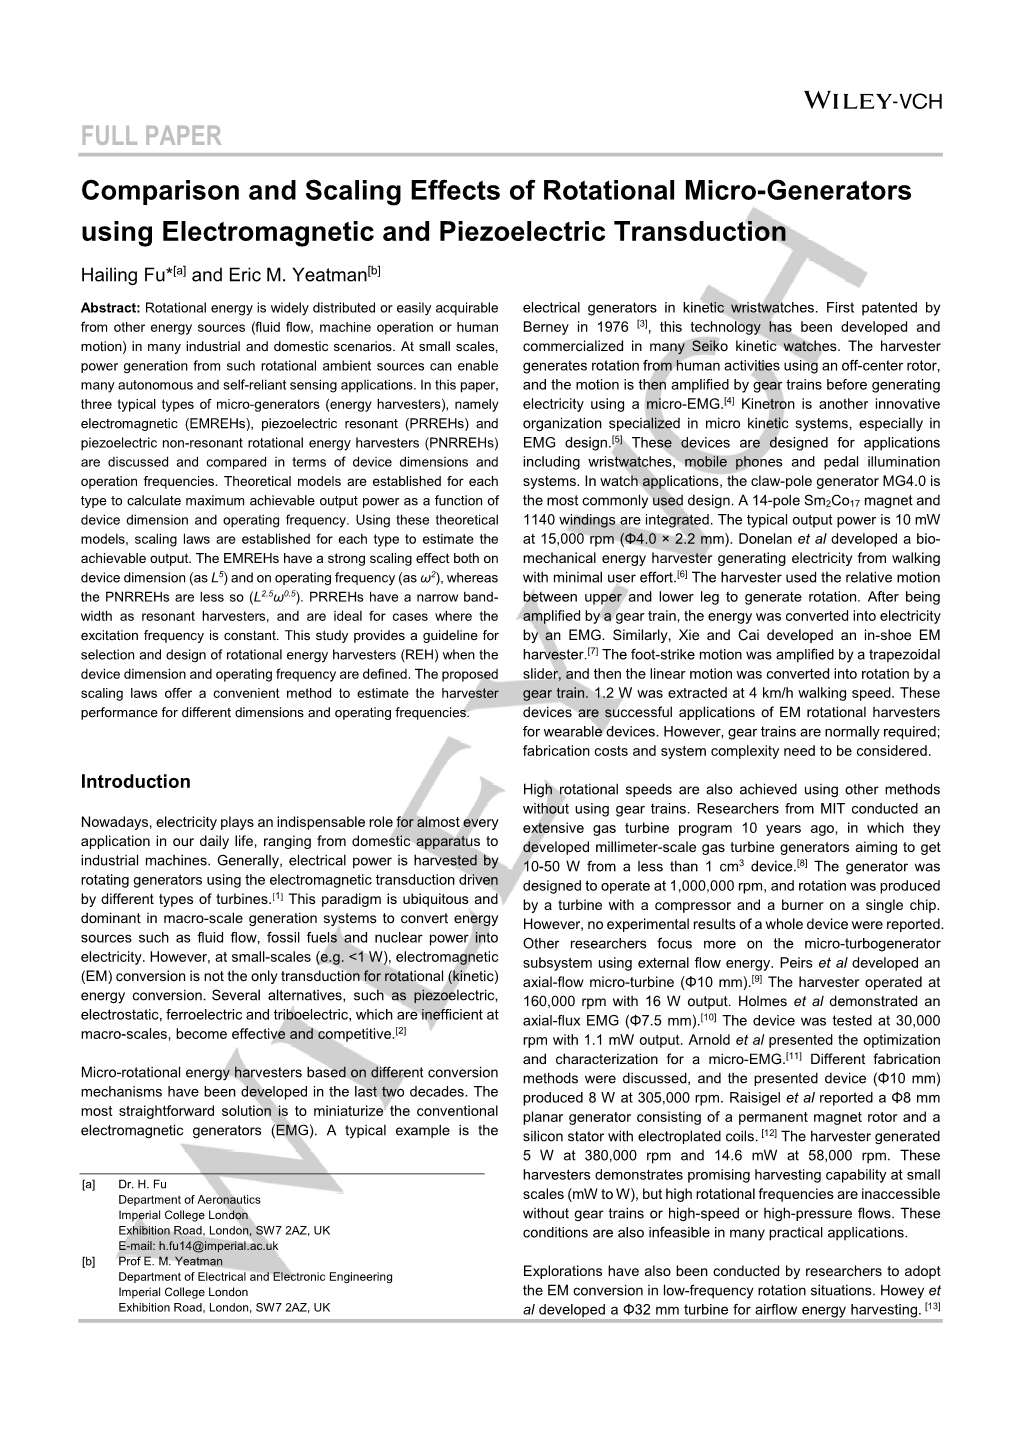 FULL PAPER Comparison and Scaling Effects of Rotational Micro-Generators Using Electromagnetic and Piezoelectric Transduction